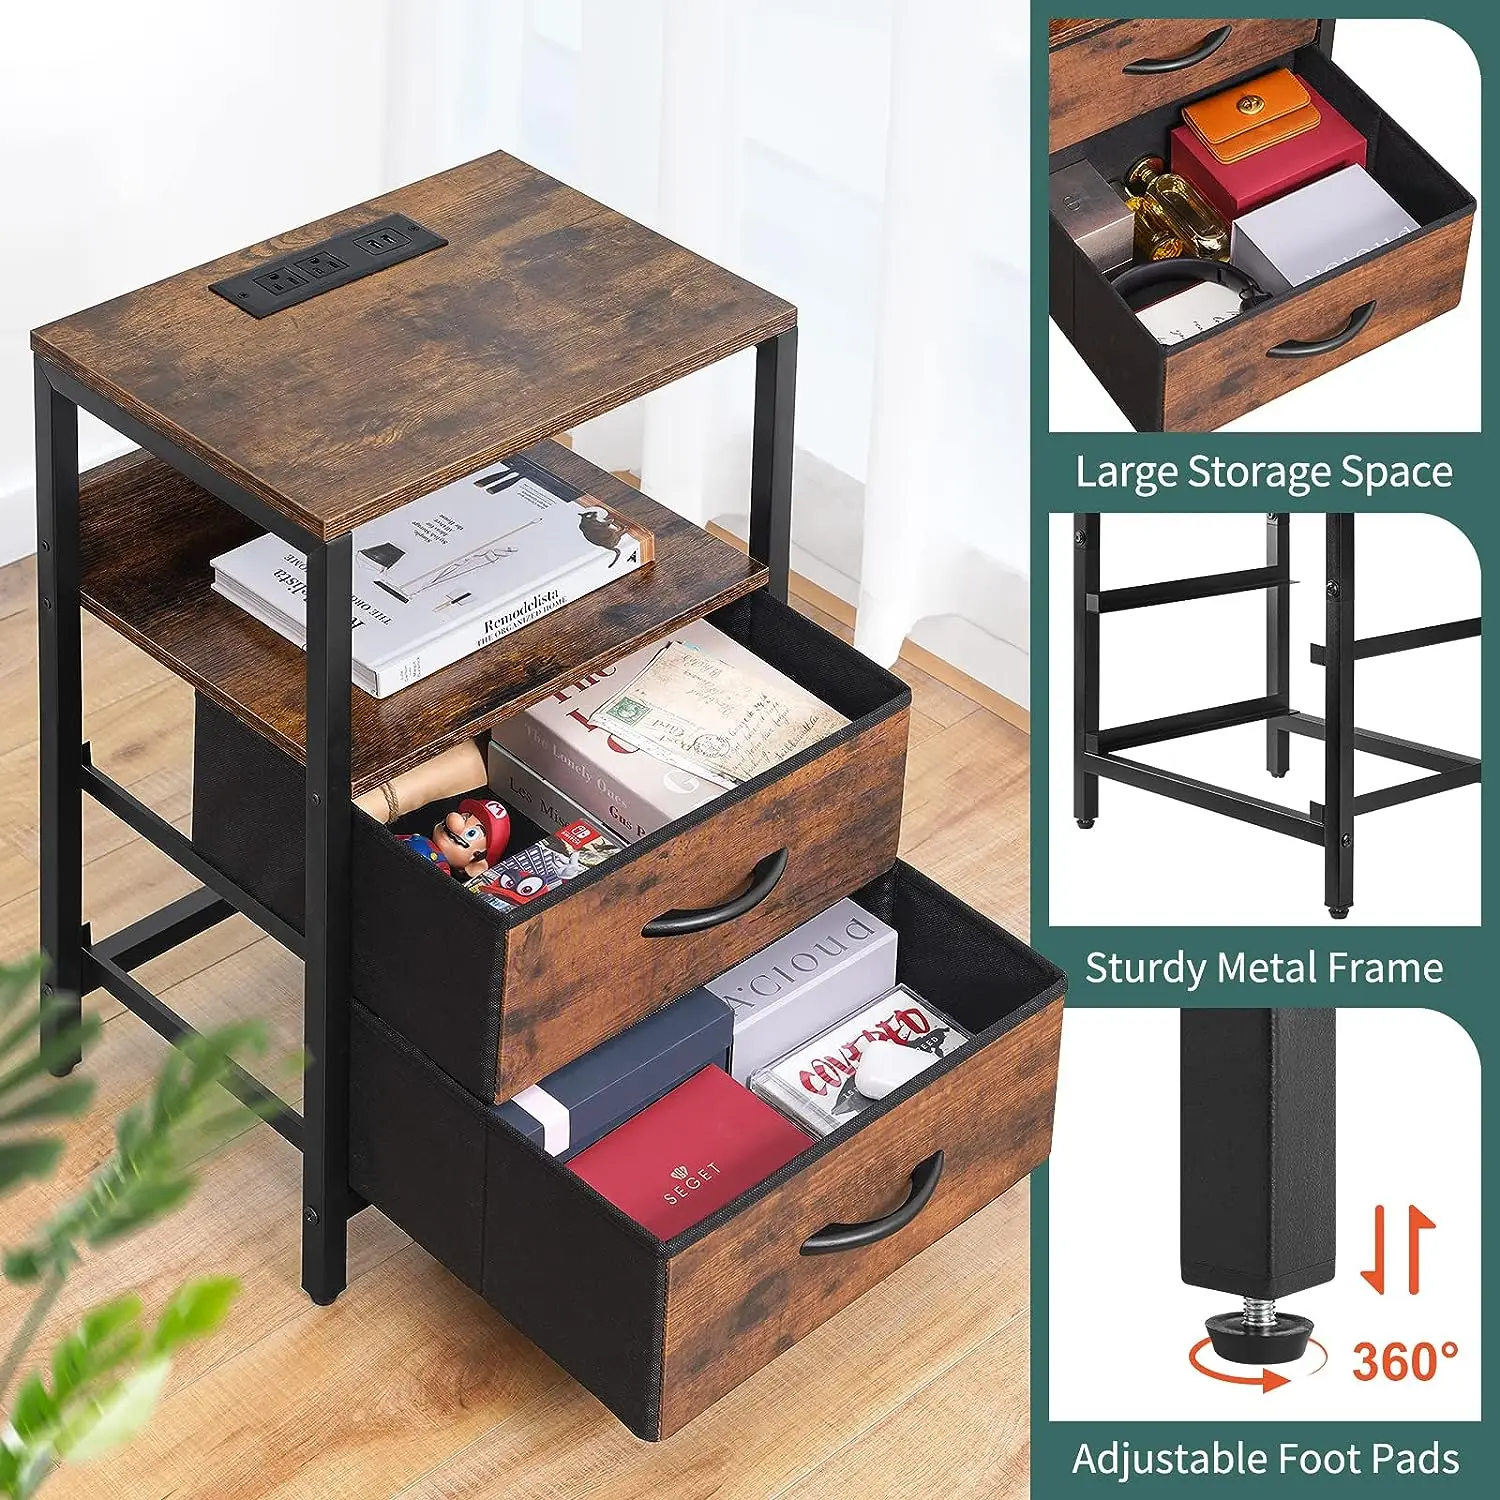 YQ Wholesale Drawers Shelves Entryway Storage Stable Metal Frame Living Room Storage Cabinet Furniture for Living Room